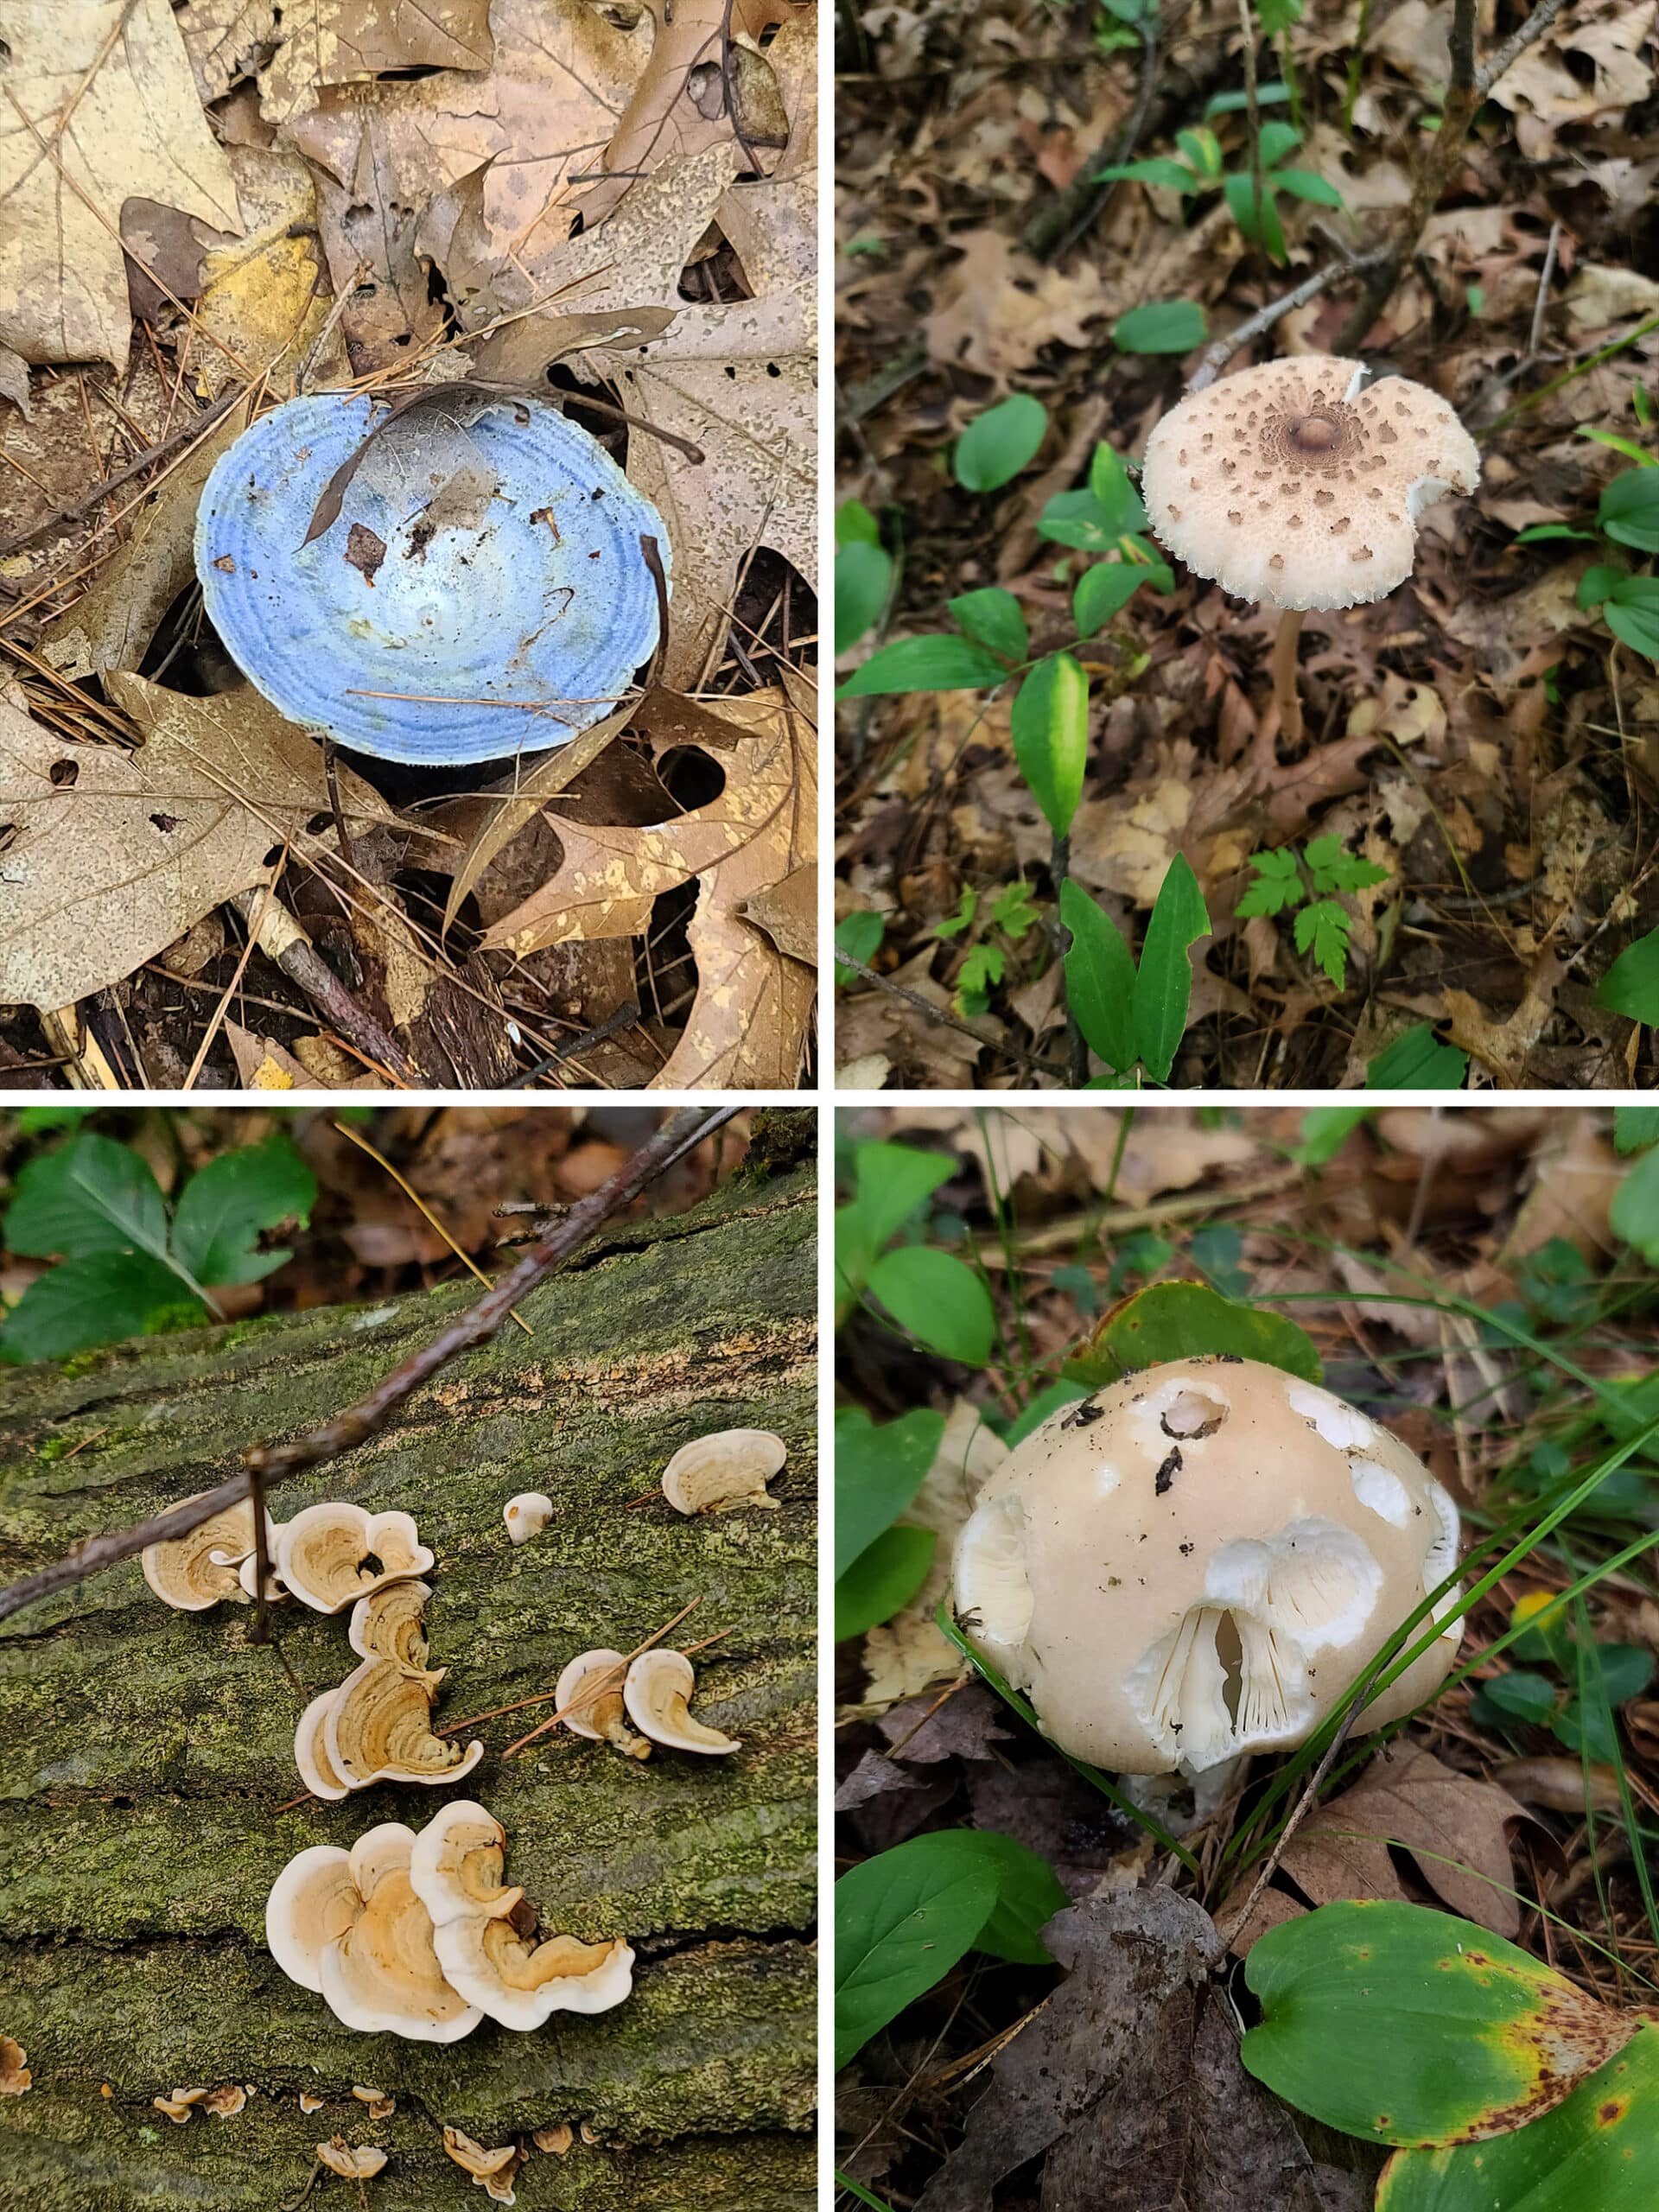 4 part compilation image of different mushrooms, including a blue one.